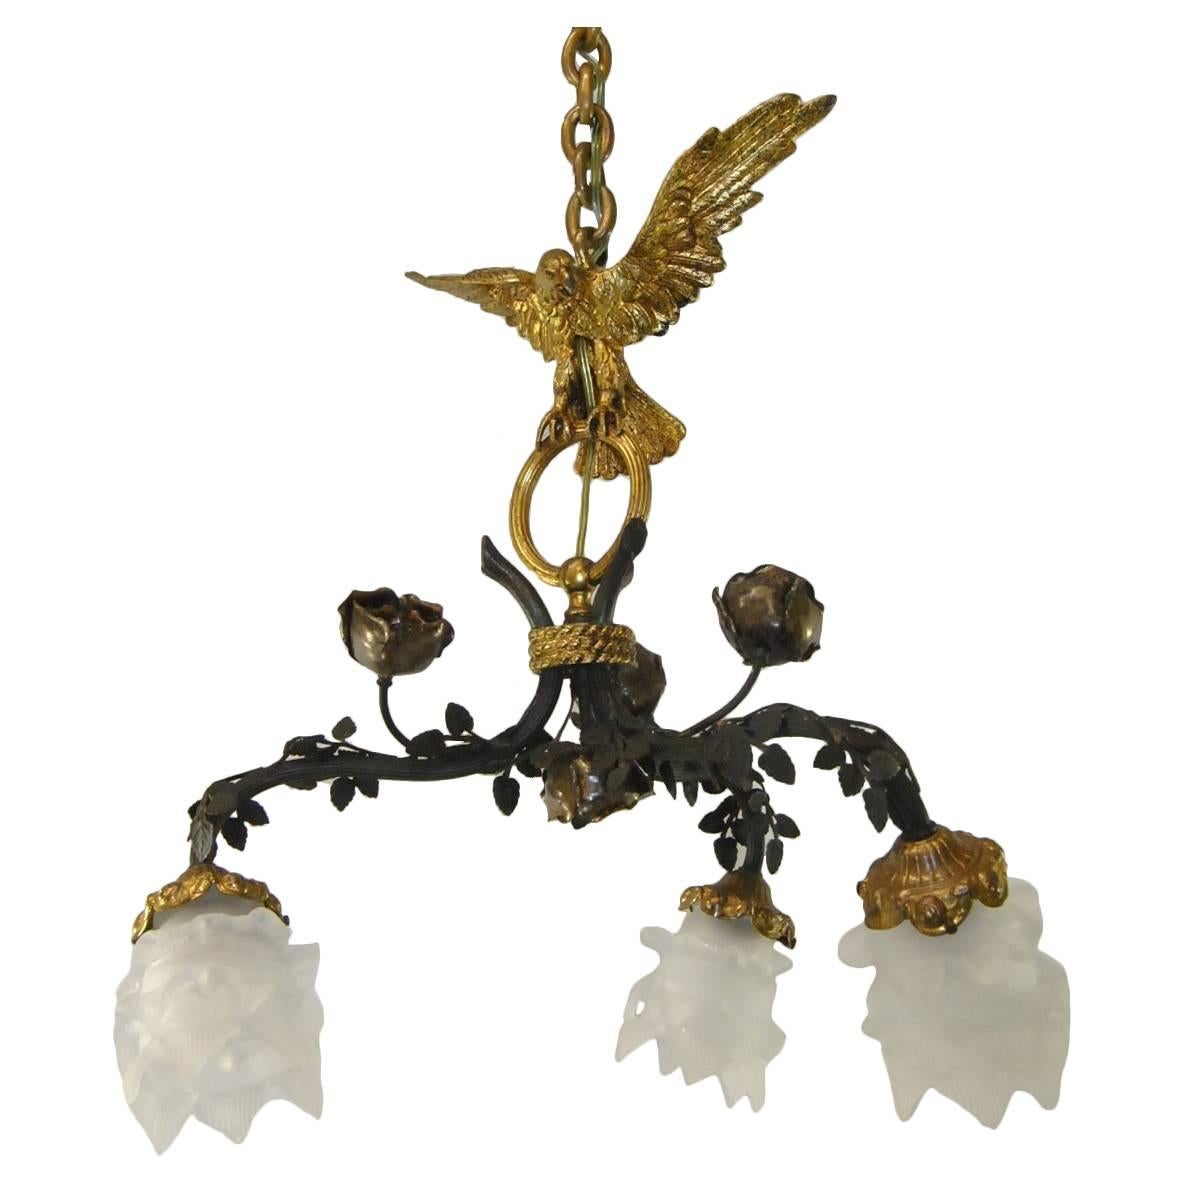 Vintage Bronze French Empire Three-Arm Eagle Chandelier Light Fixture For Sale